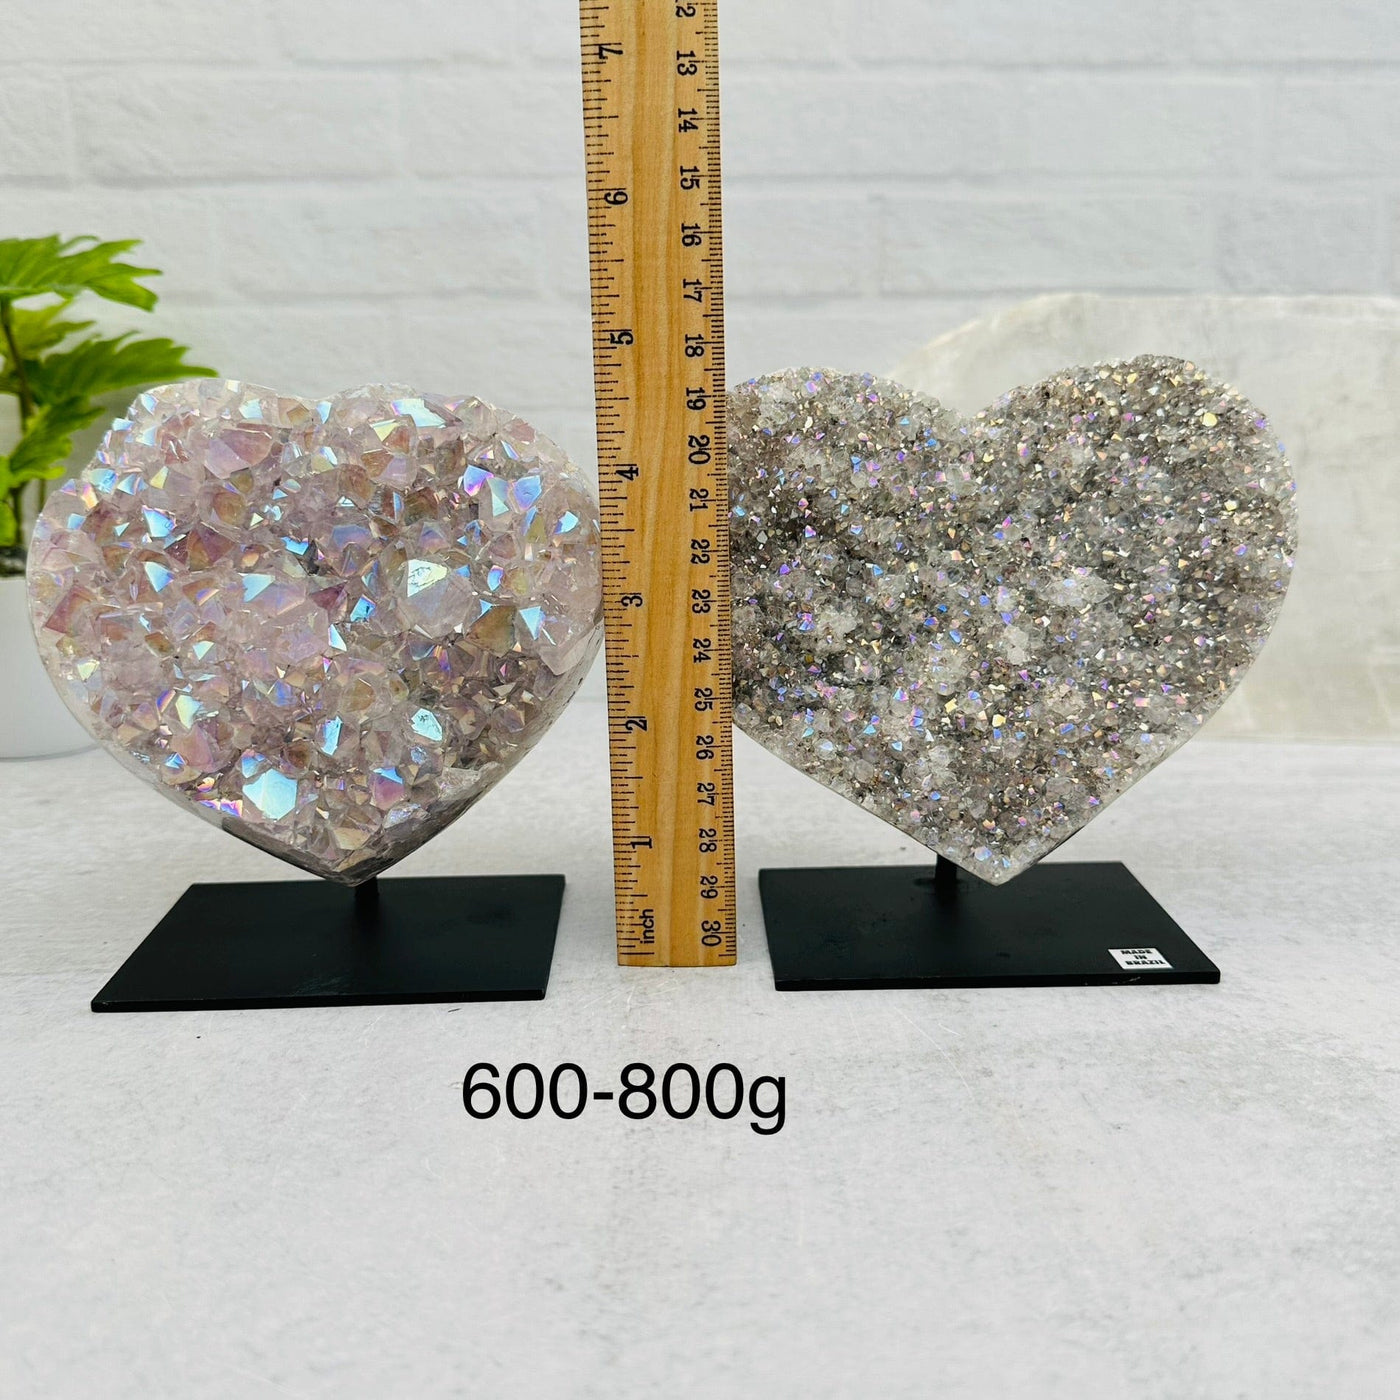 Amethyst Druzy Crystal Heart with Angel Aura on Metal Stand by weight. next to a ruler for size reference